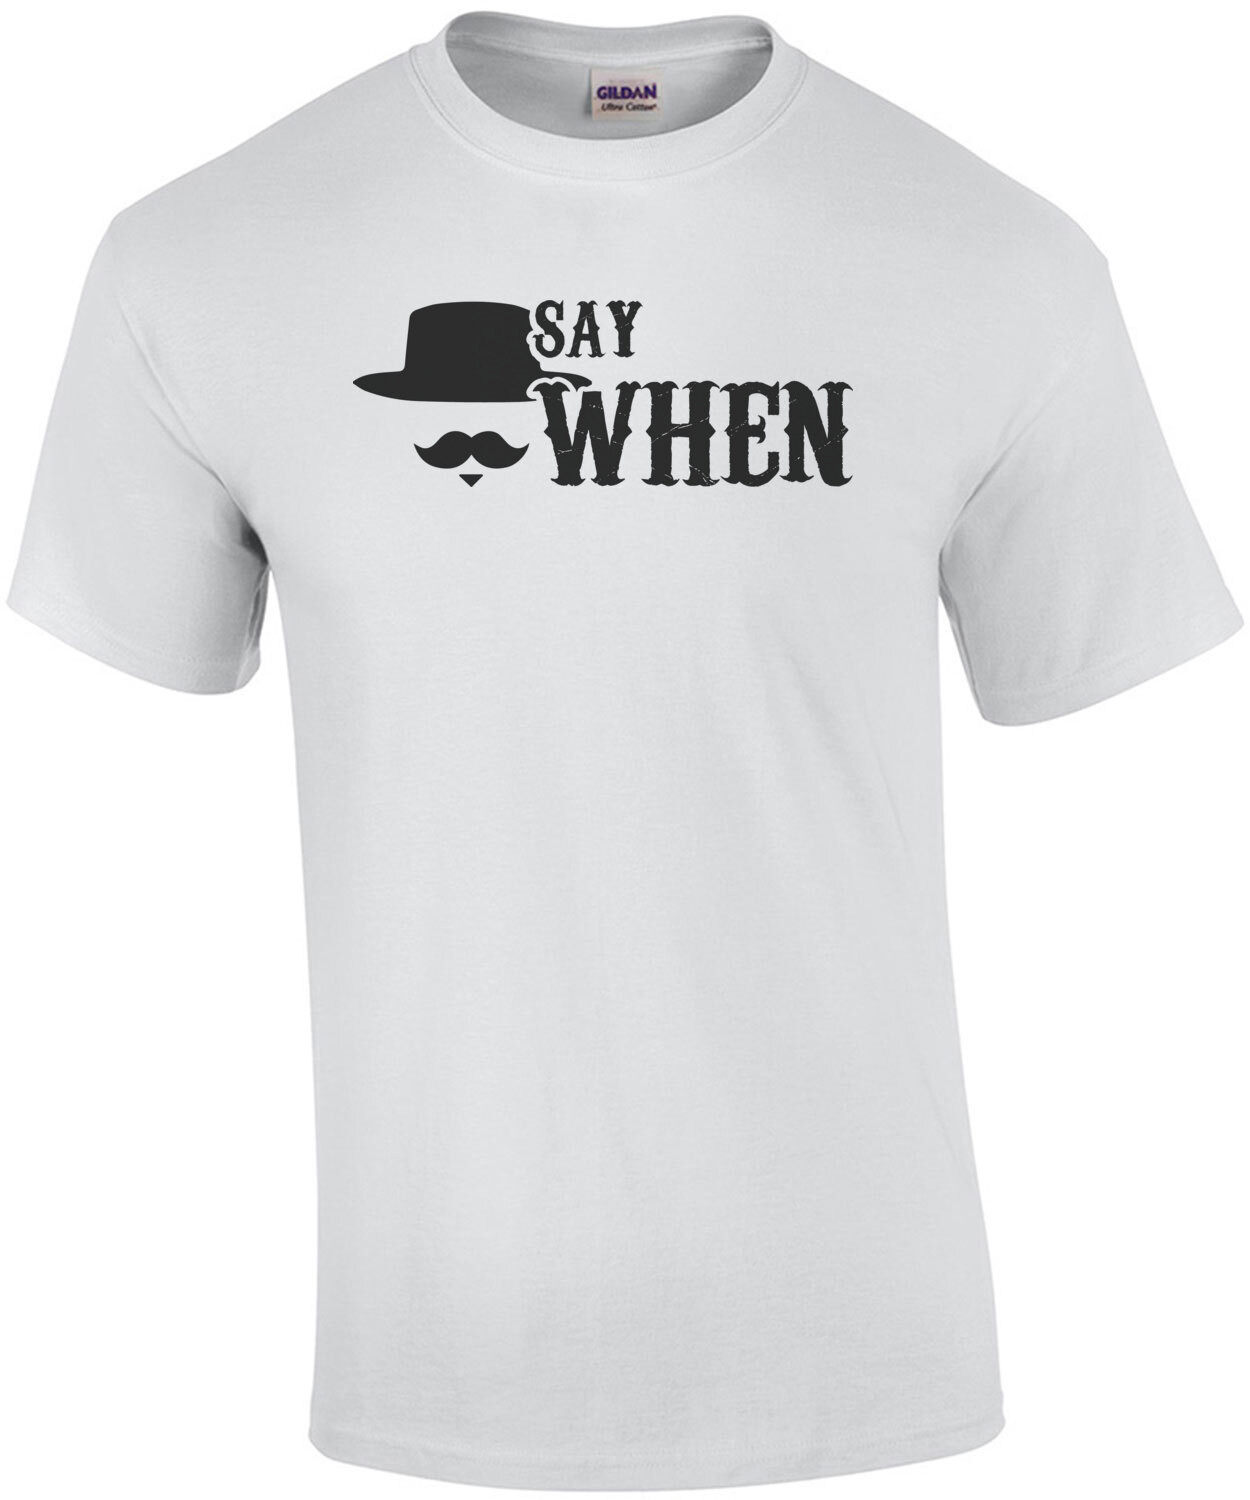 Say When - Tombstone - 90's T-Shirt